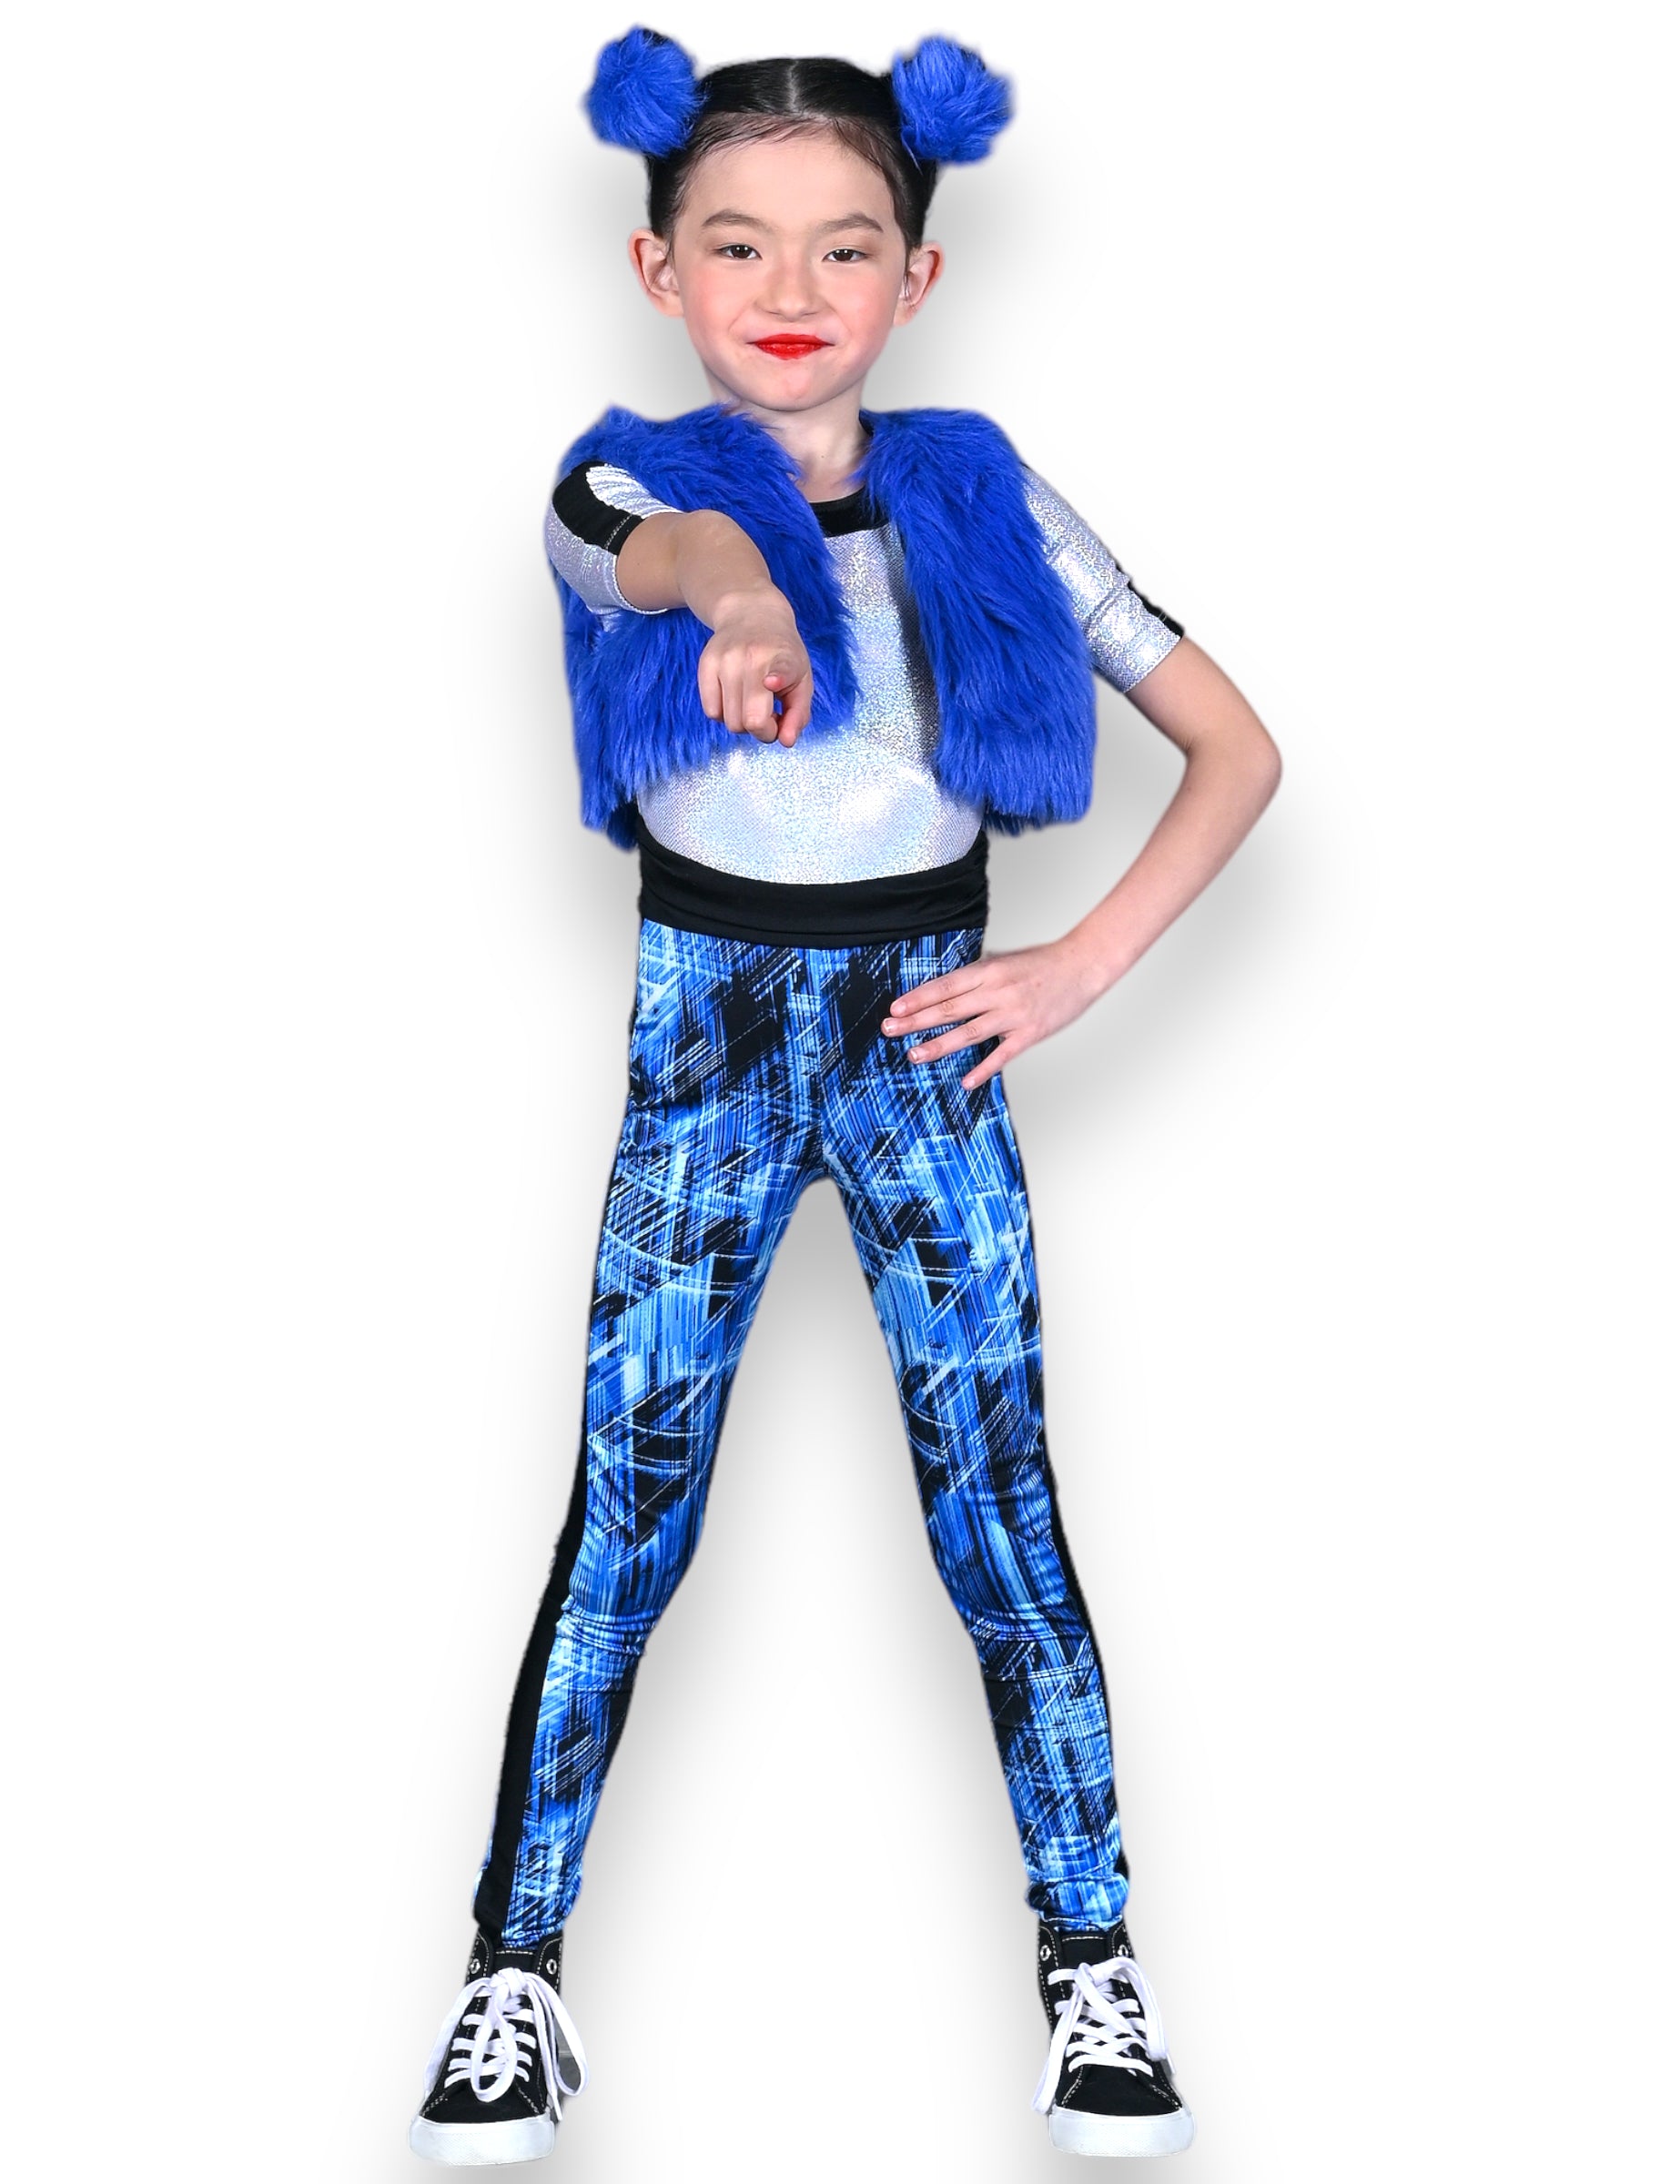 Small child in blue and silver spandex unitard with foil dot details, accompanied by a blue faux fur vest. The child is also wearing two blue hair poufs with clips.